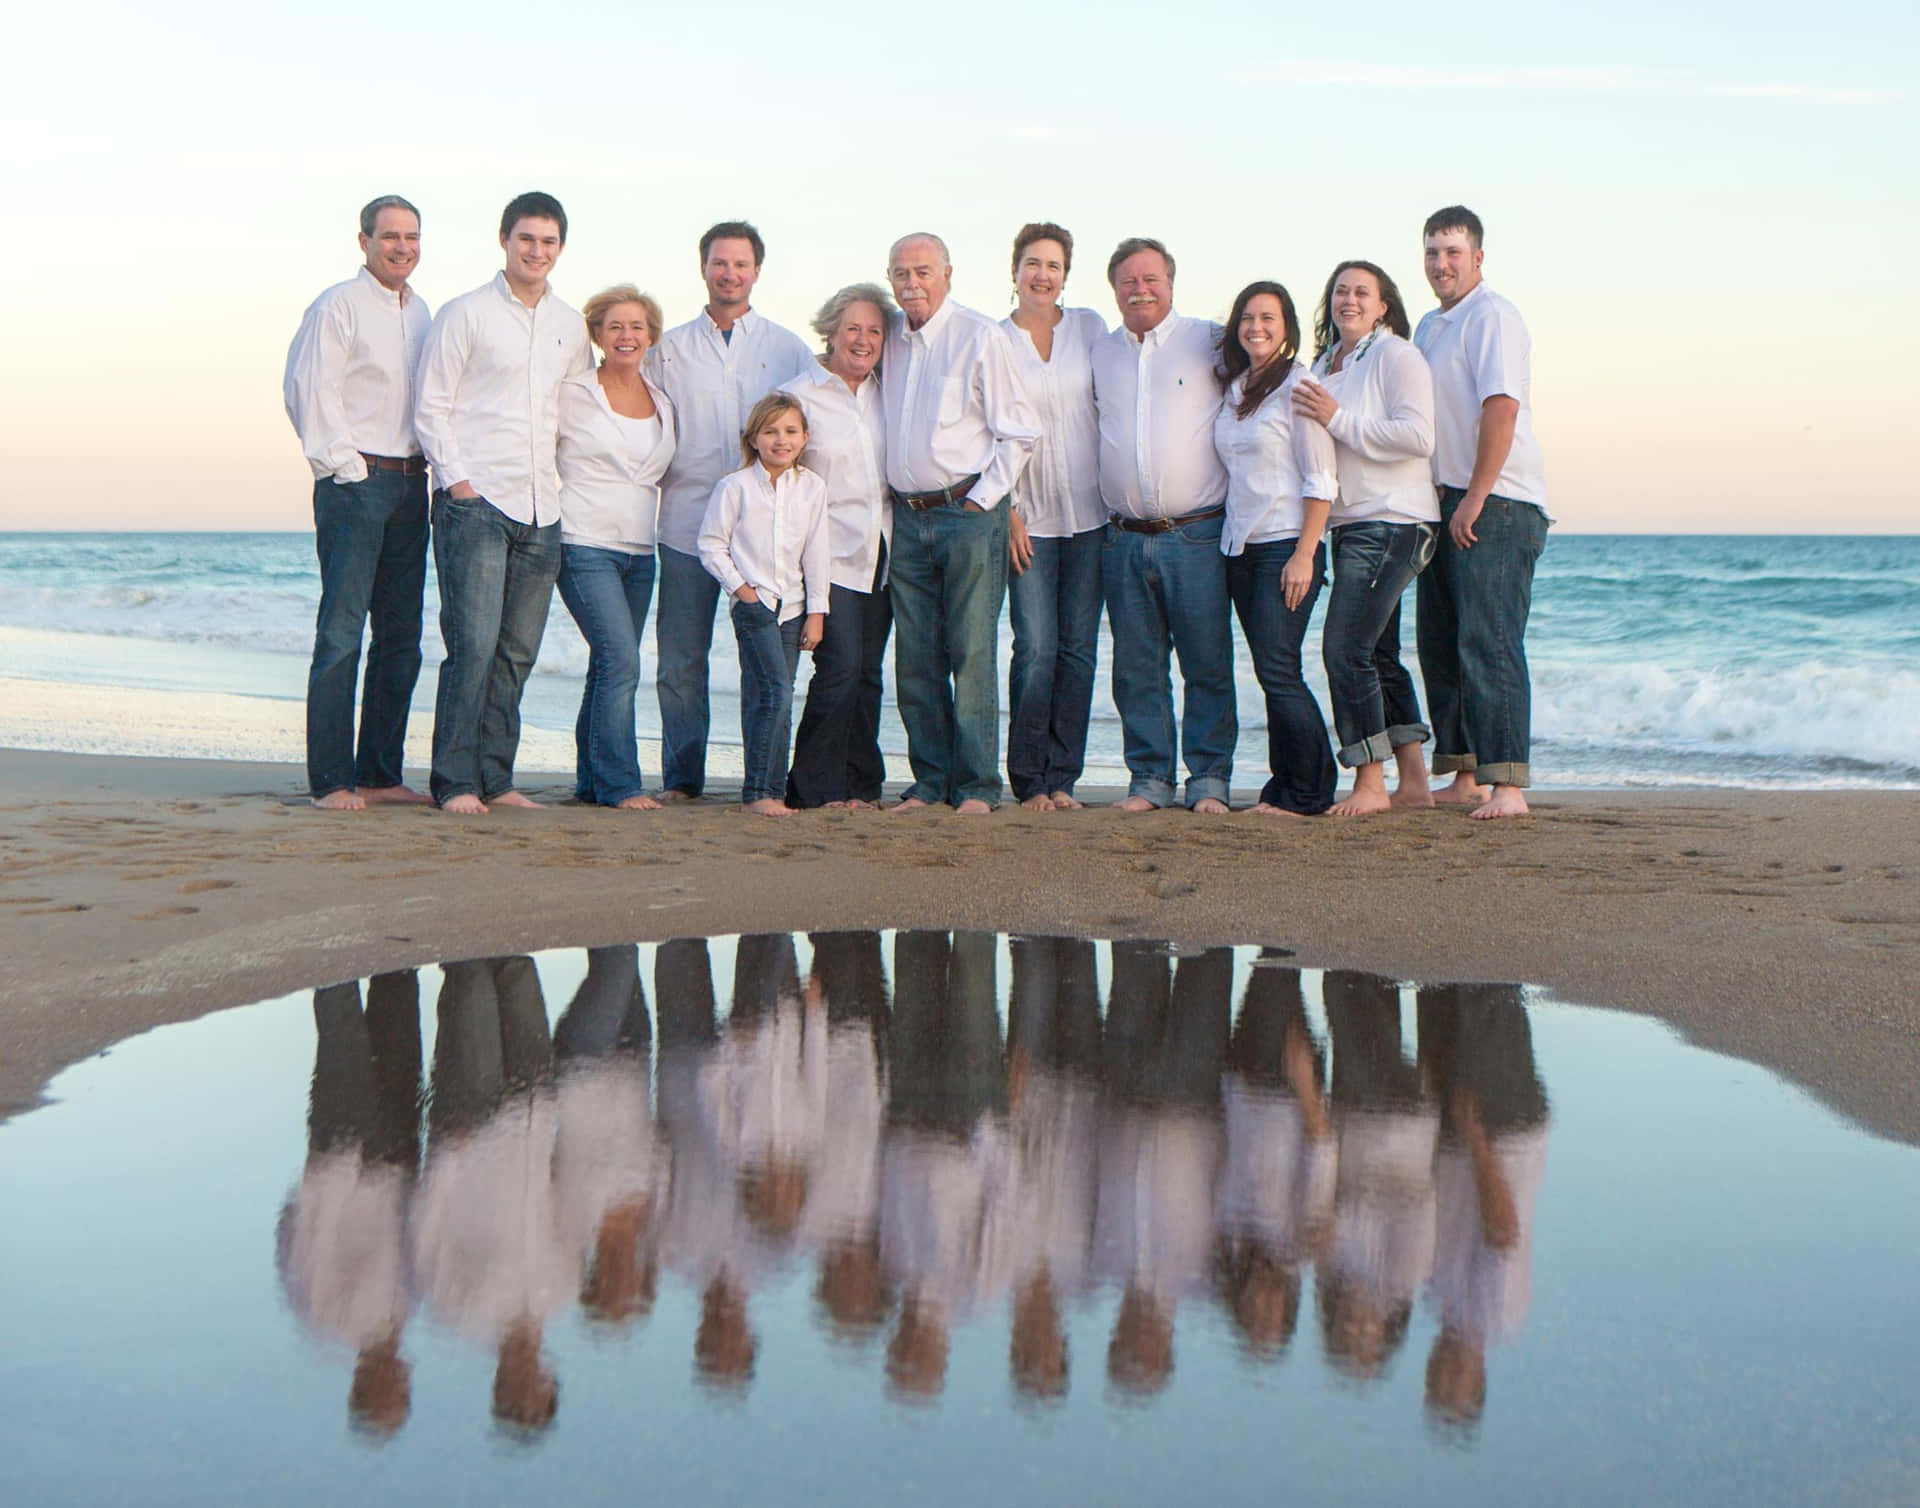 A Family Is Posing On The Beach With Their Reflection In The Water